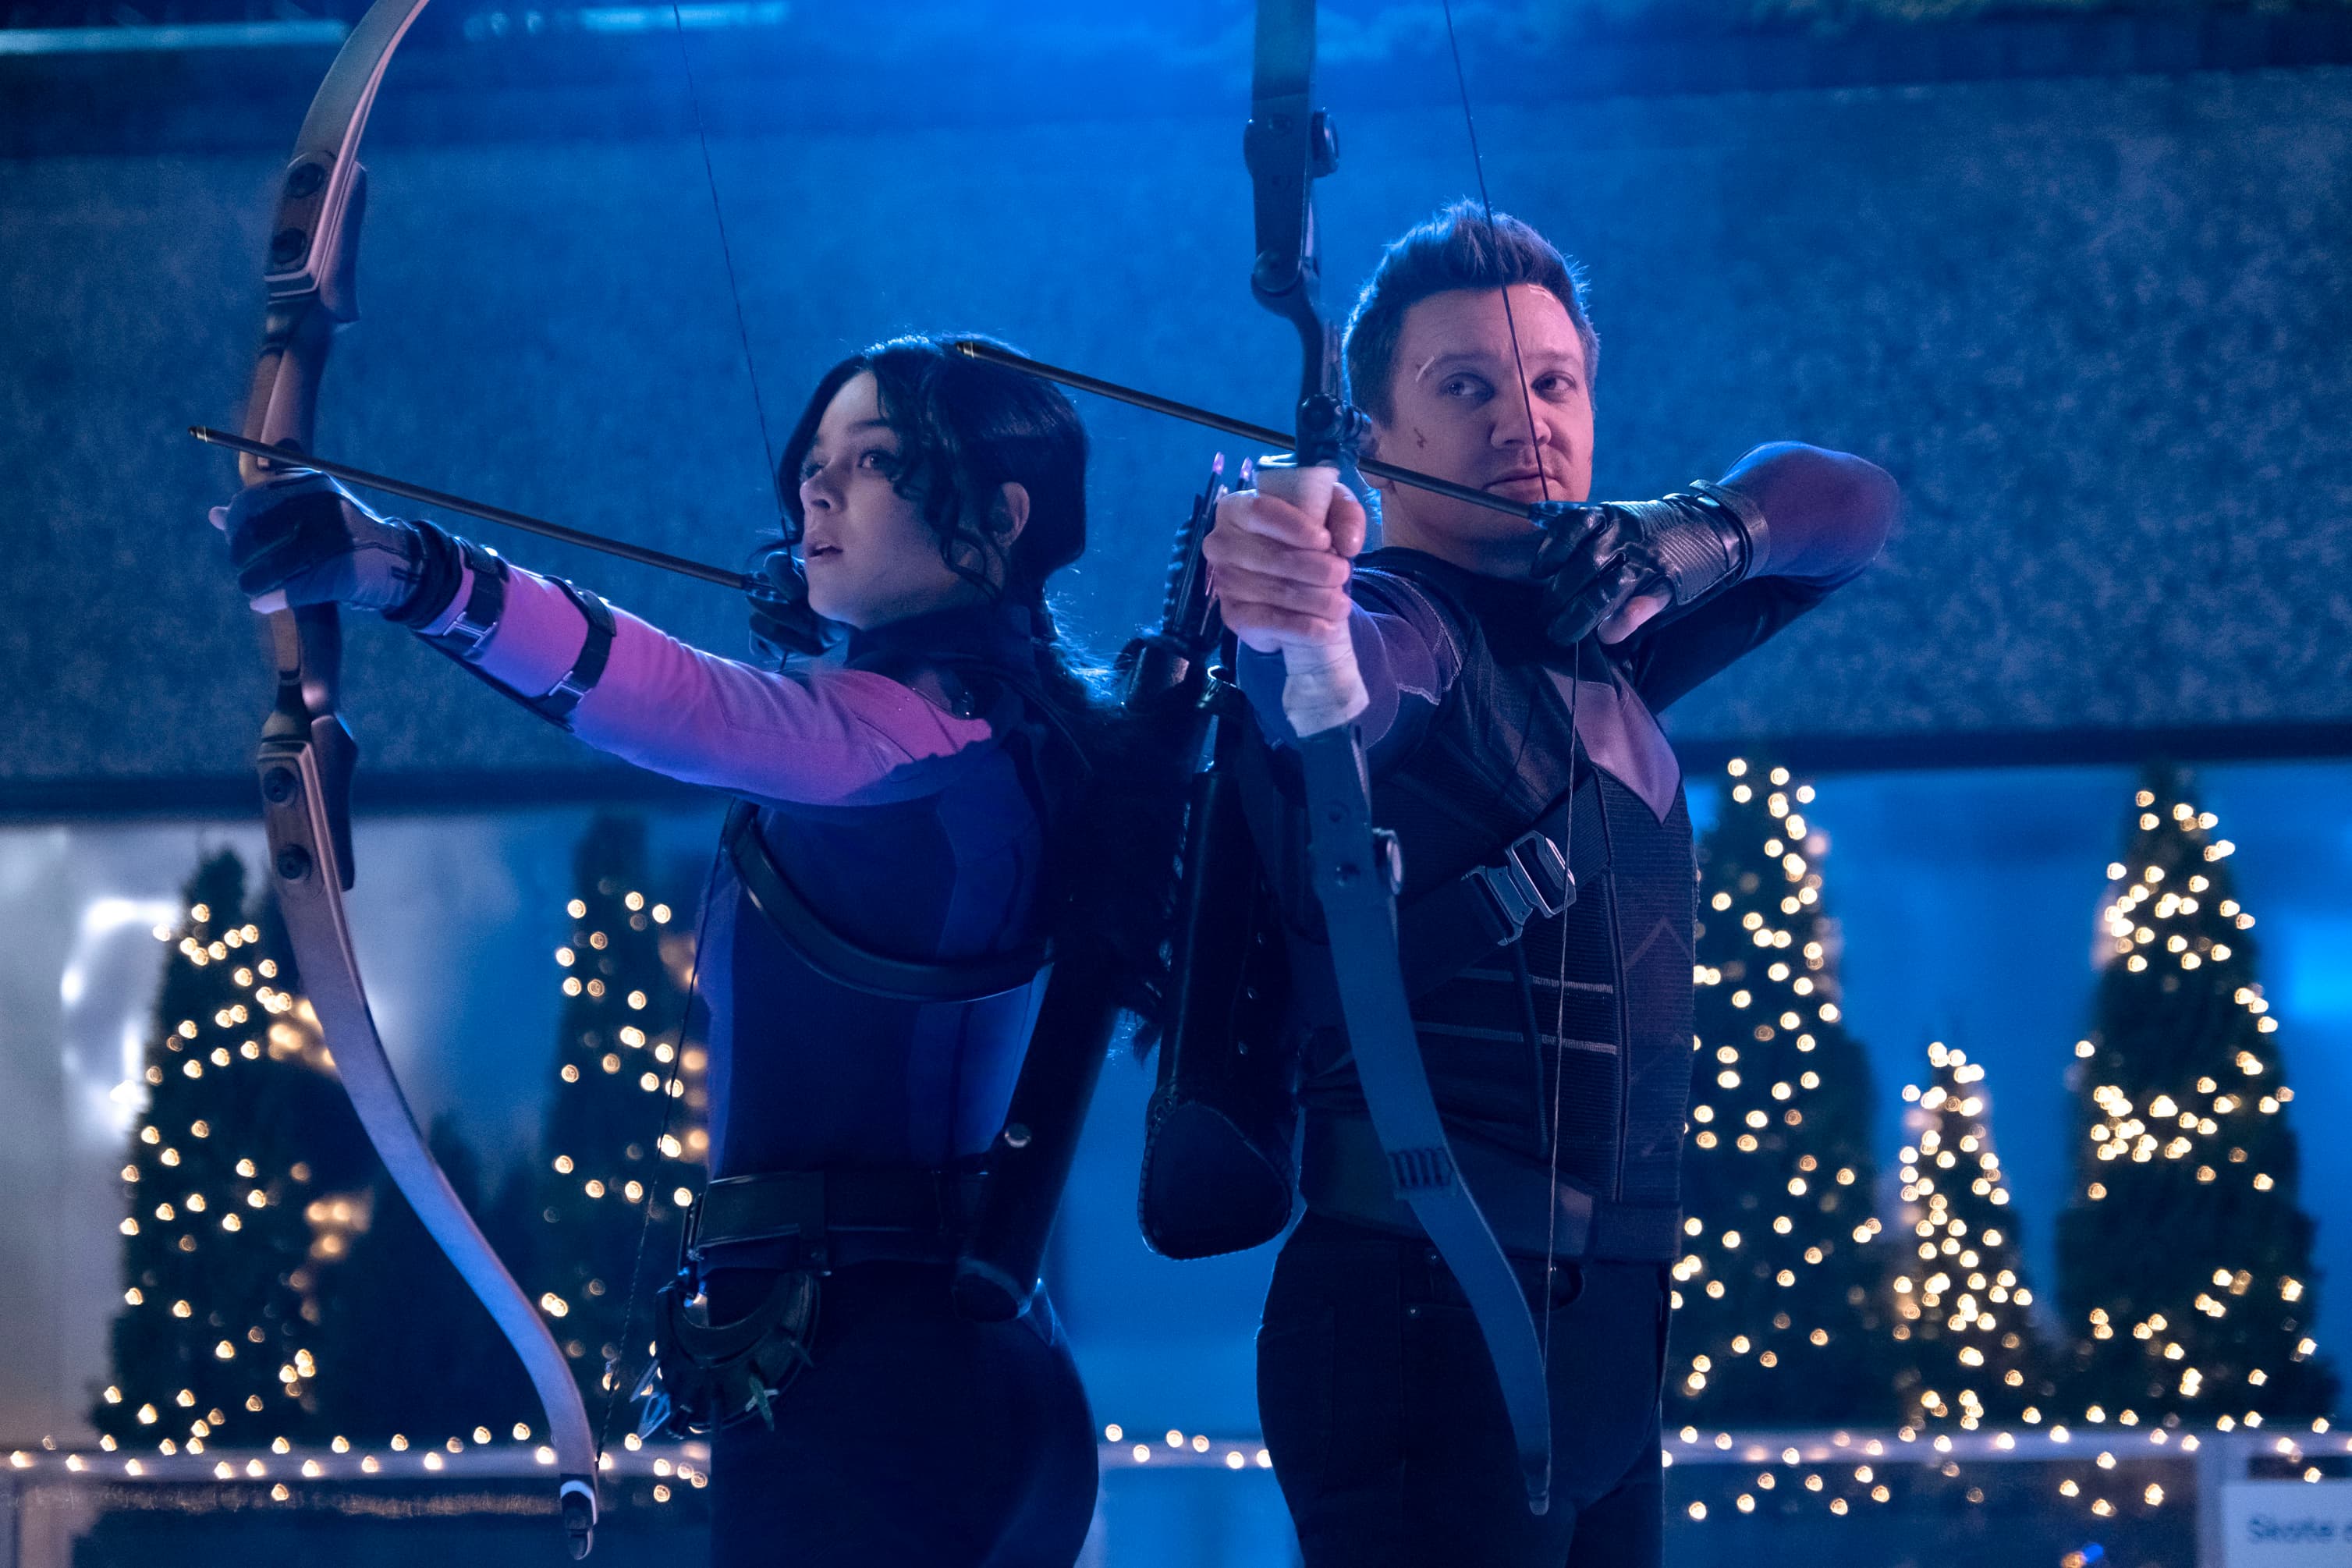 Hailee Stenfield as Kate Bishhop (left) and Jeremy Renner as Hawkeye (right)